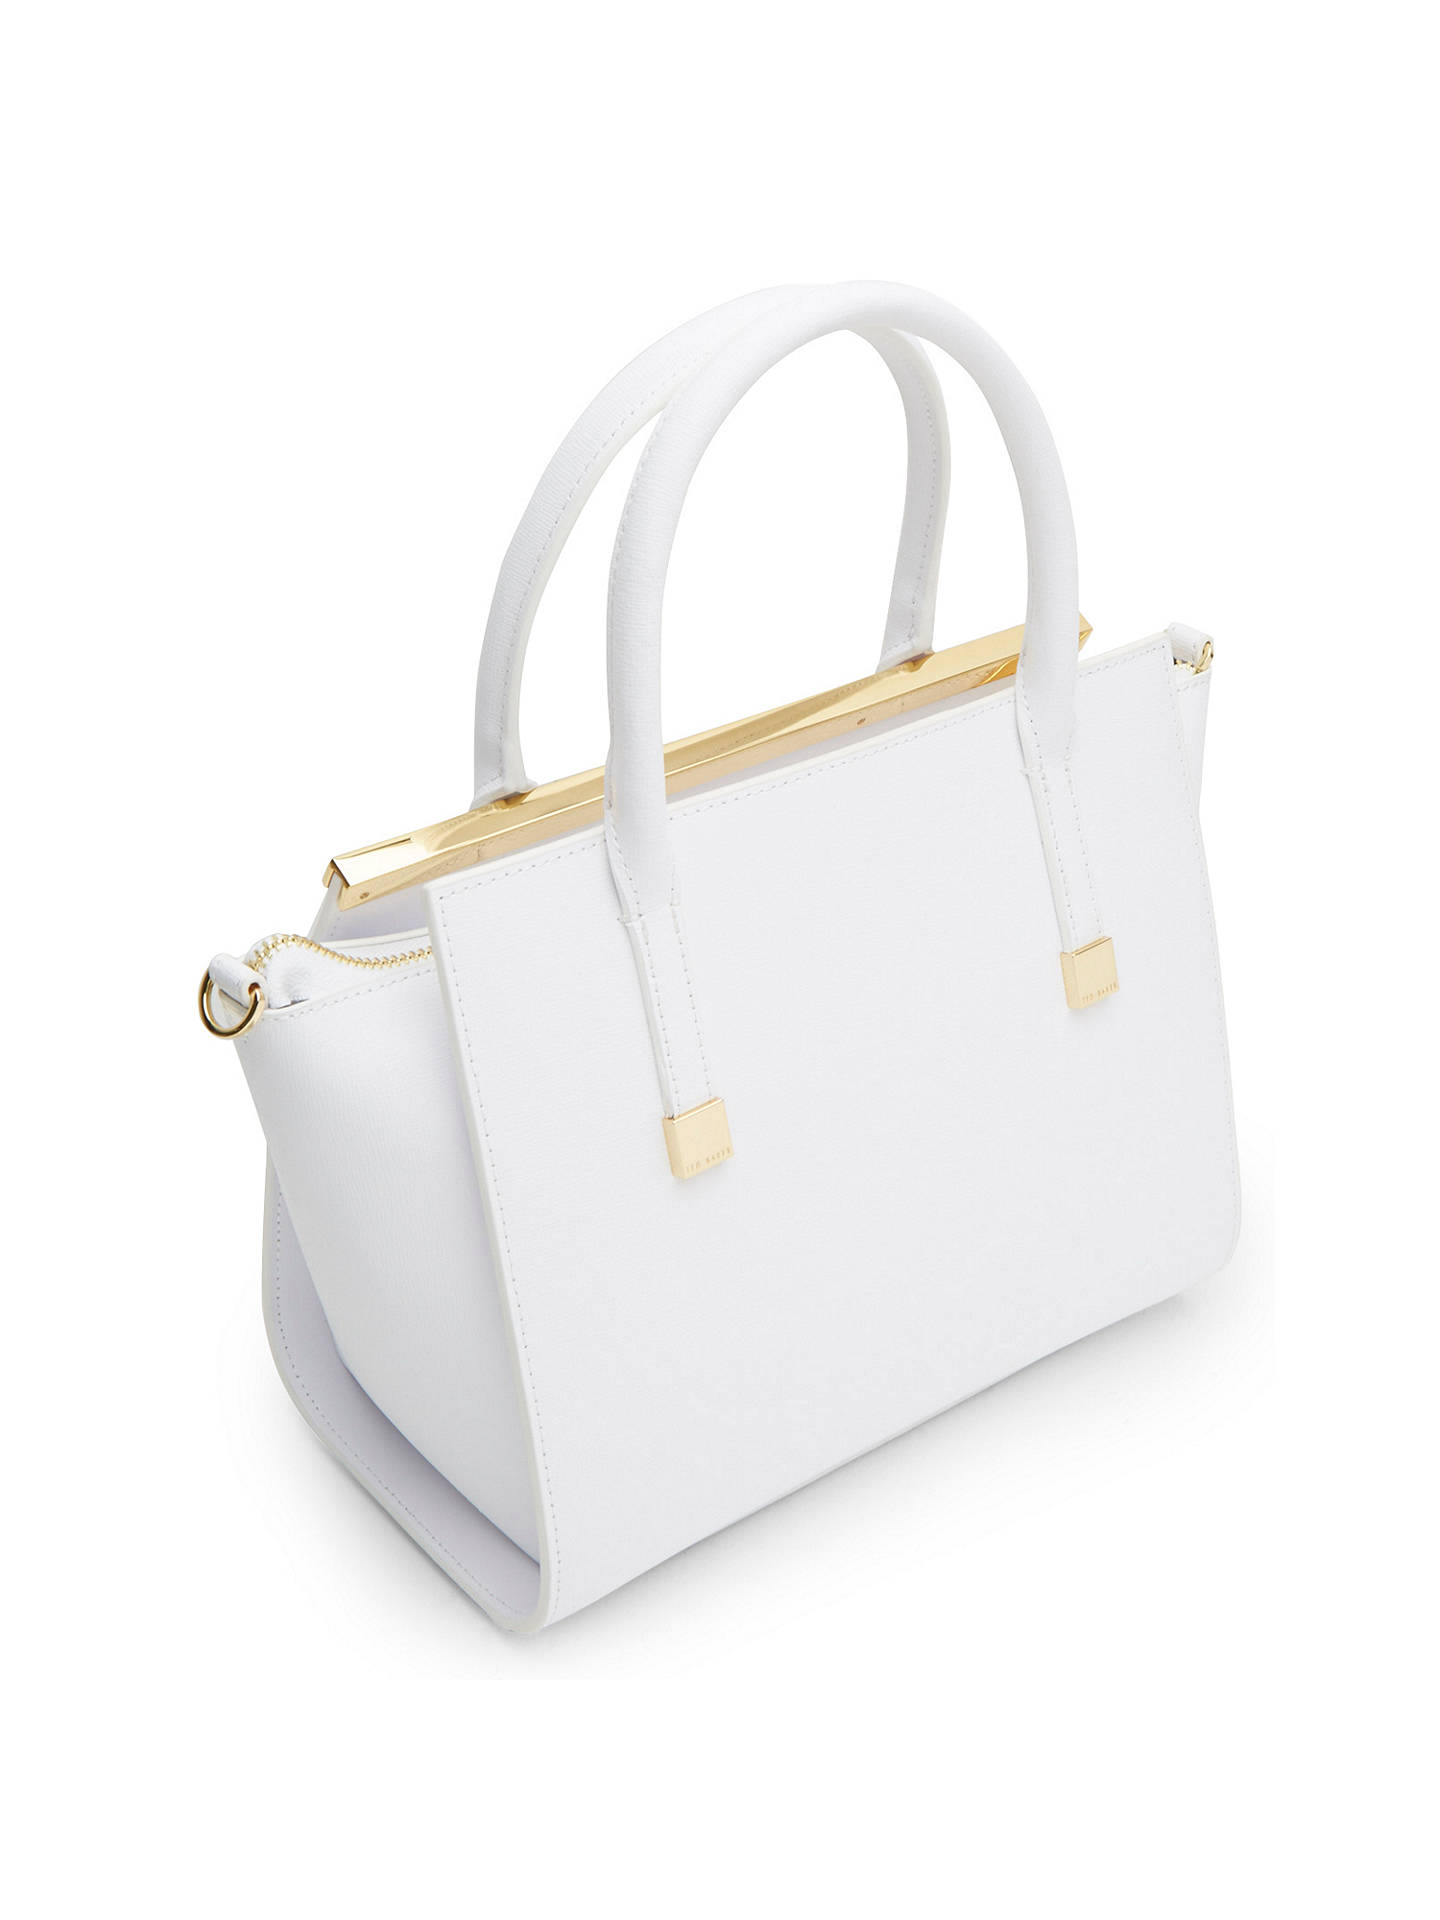 Ted Baker Trudy Leather Tote Bag, White at John Lewis & Partners